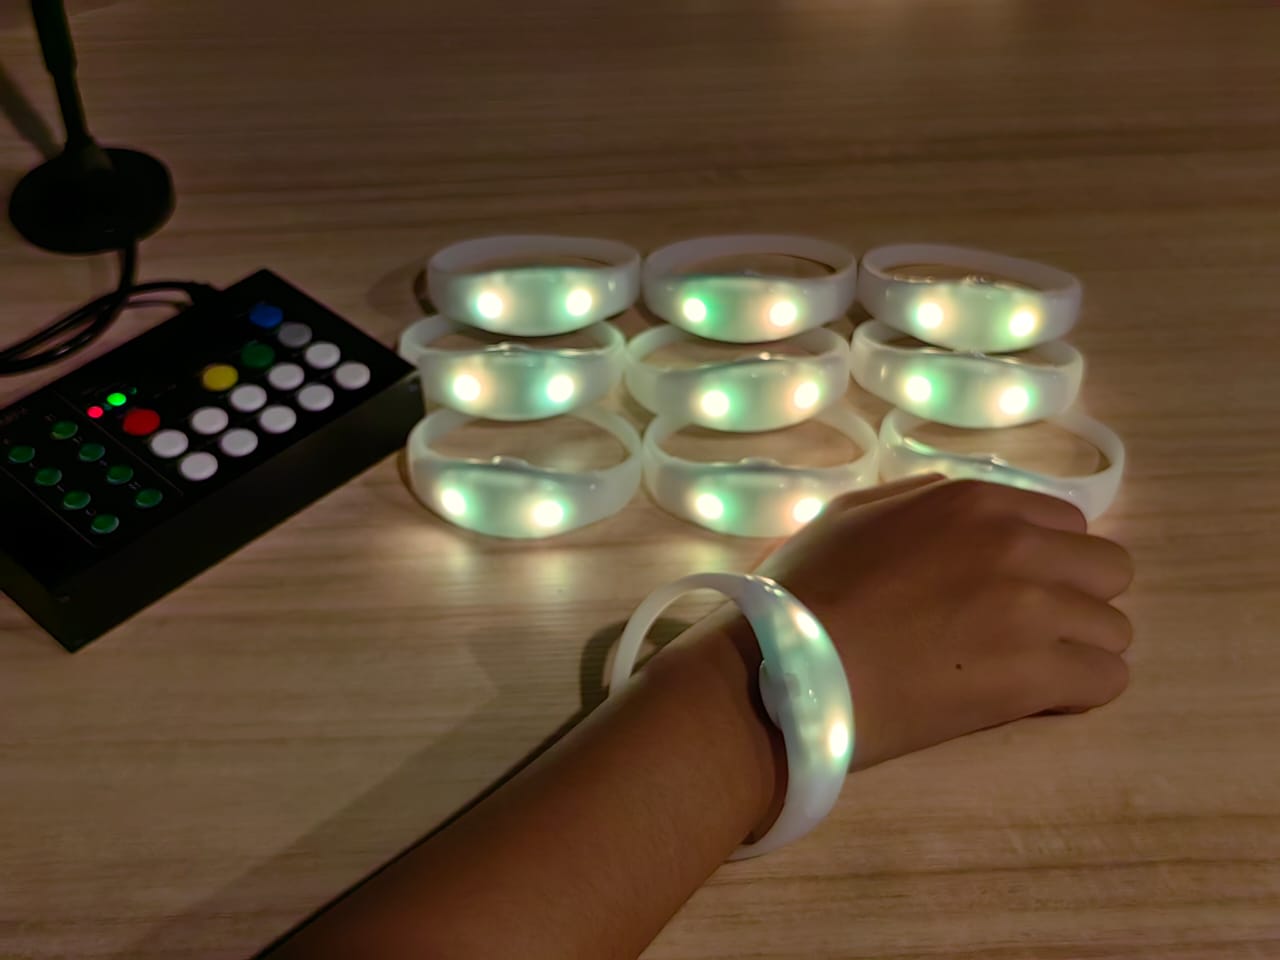 NTH LED Wristbands | Not That High